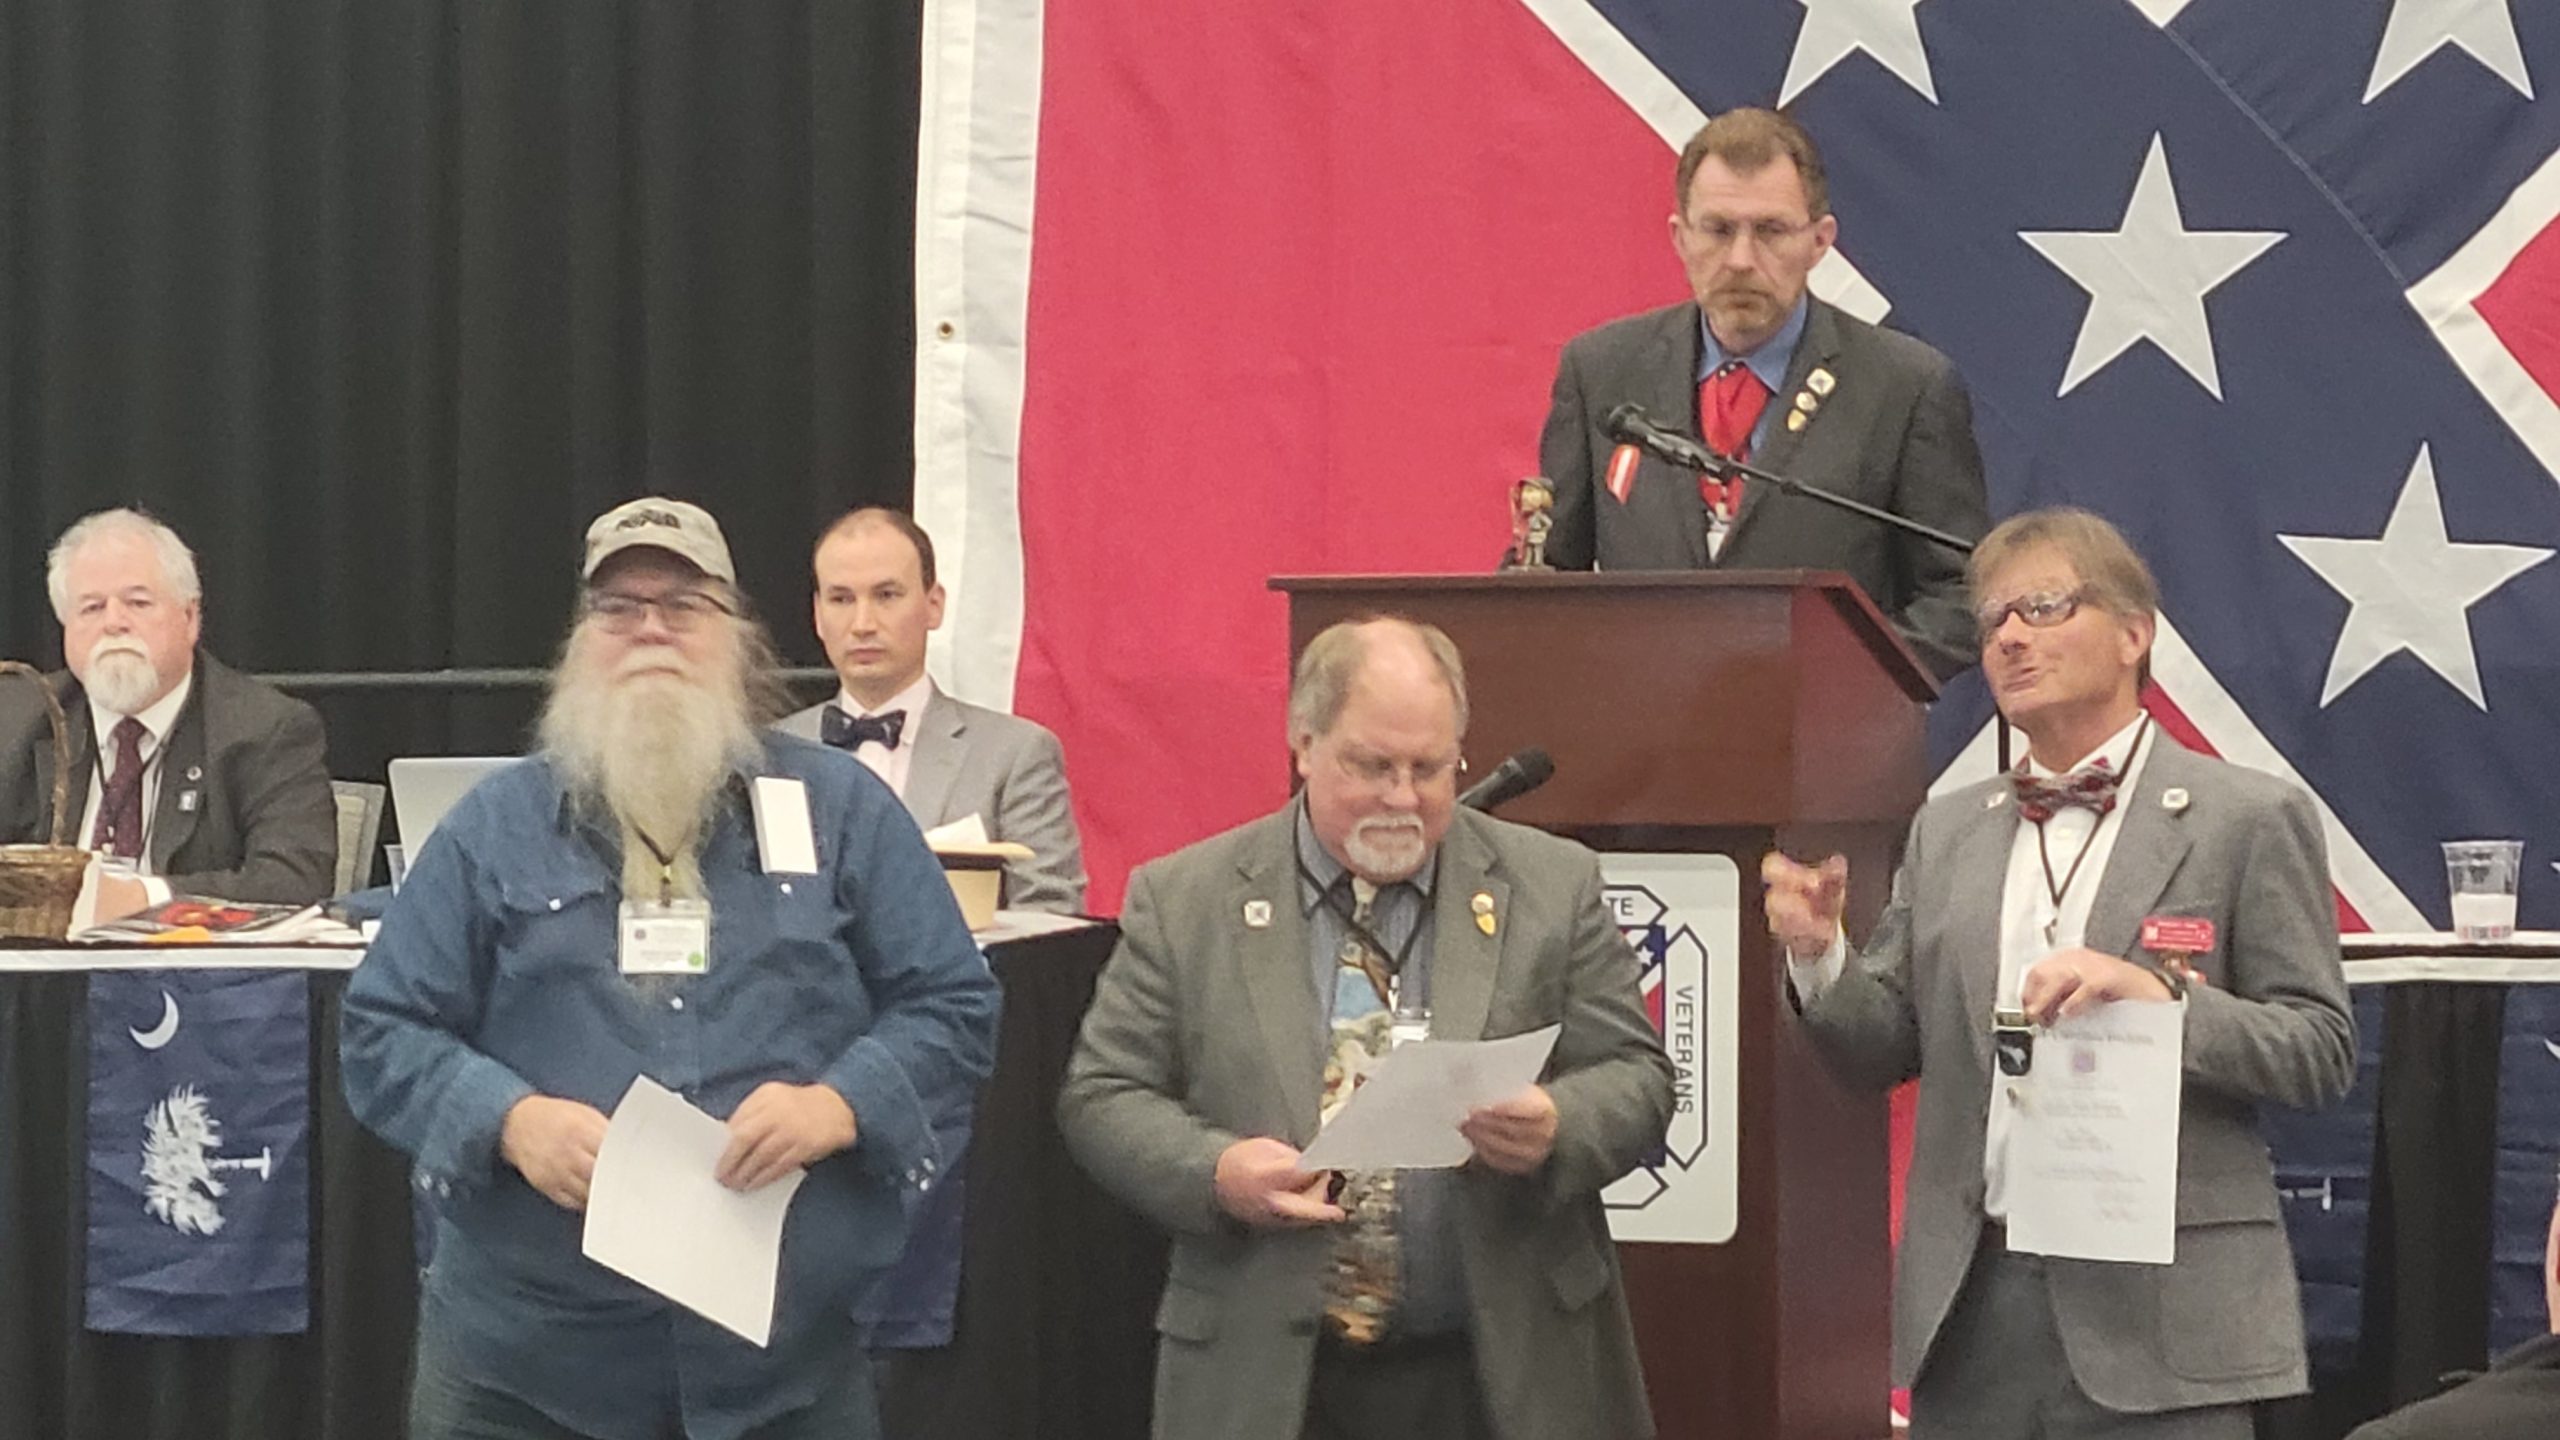 Sons of Confederate Veterans South Carolina Florence Convention 2021-03-20 14.07.42